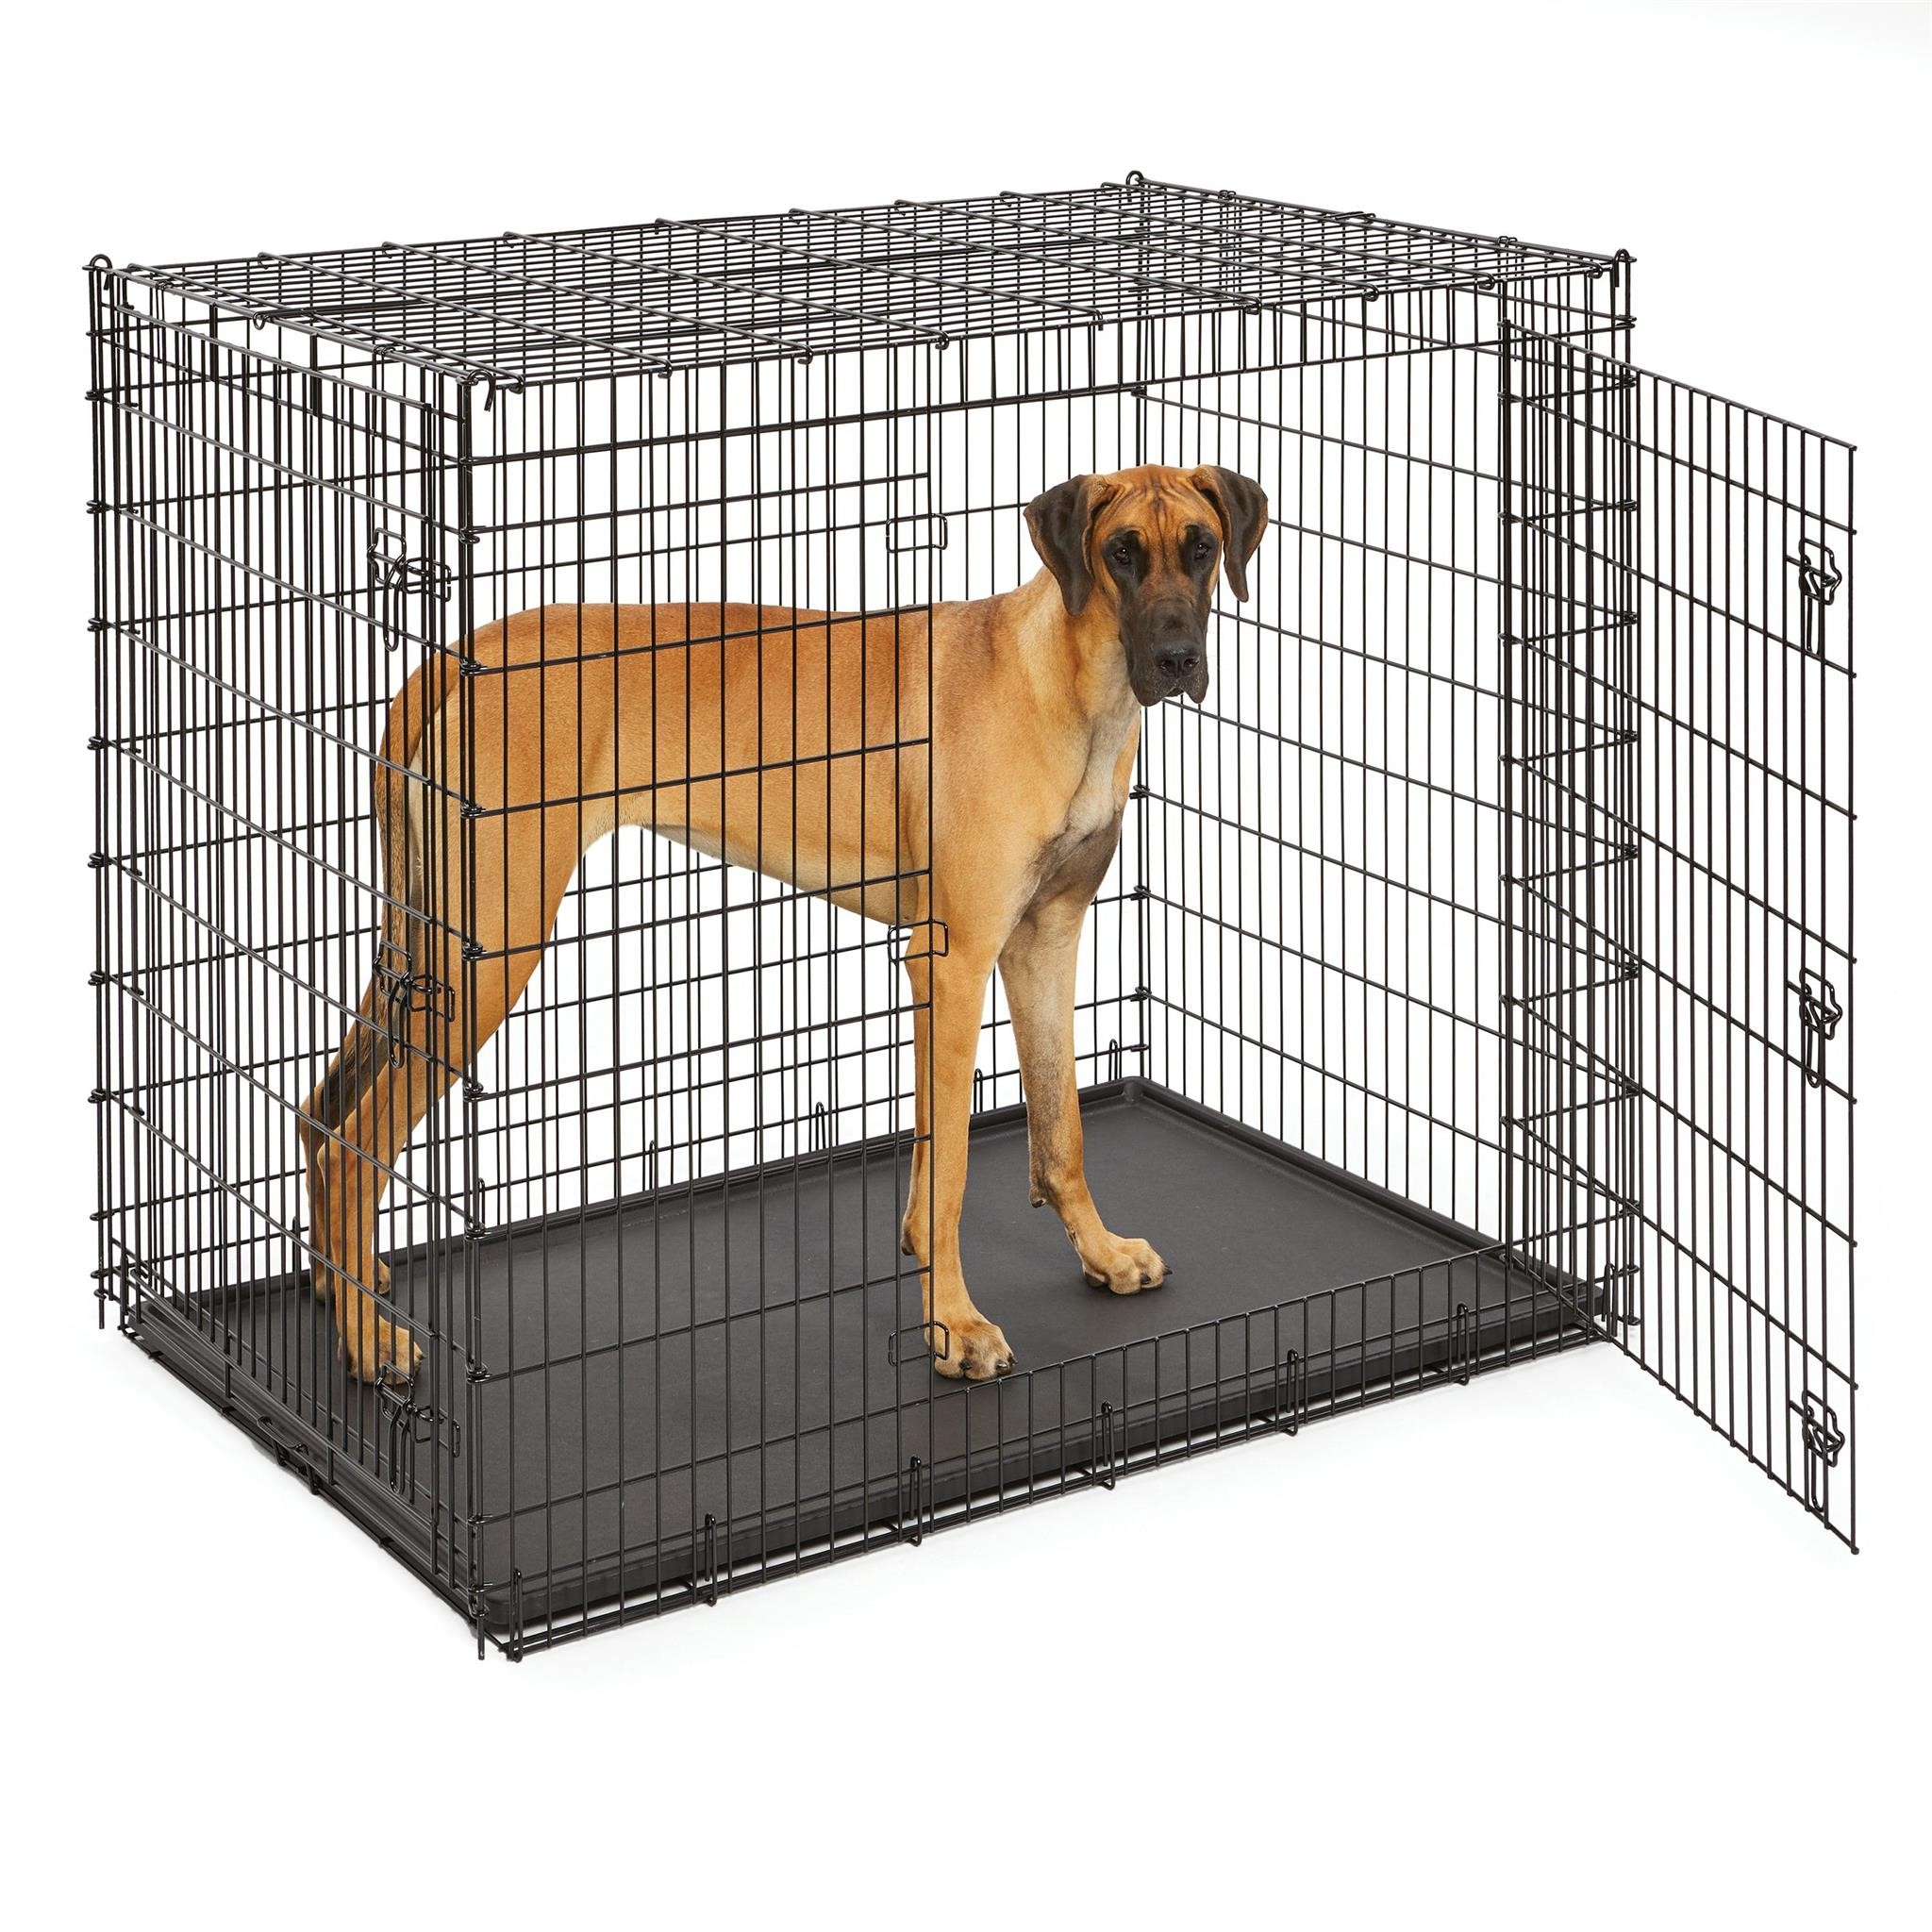 MidWest Solutions 2 Door Large Dog Crate